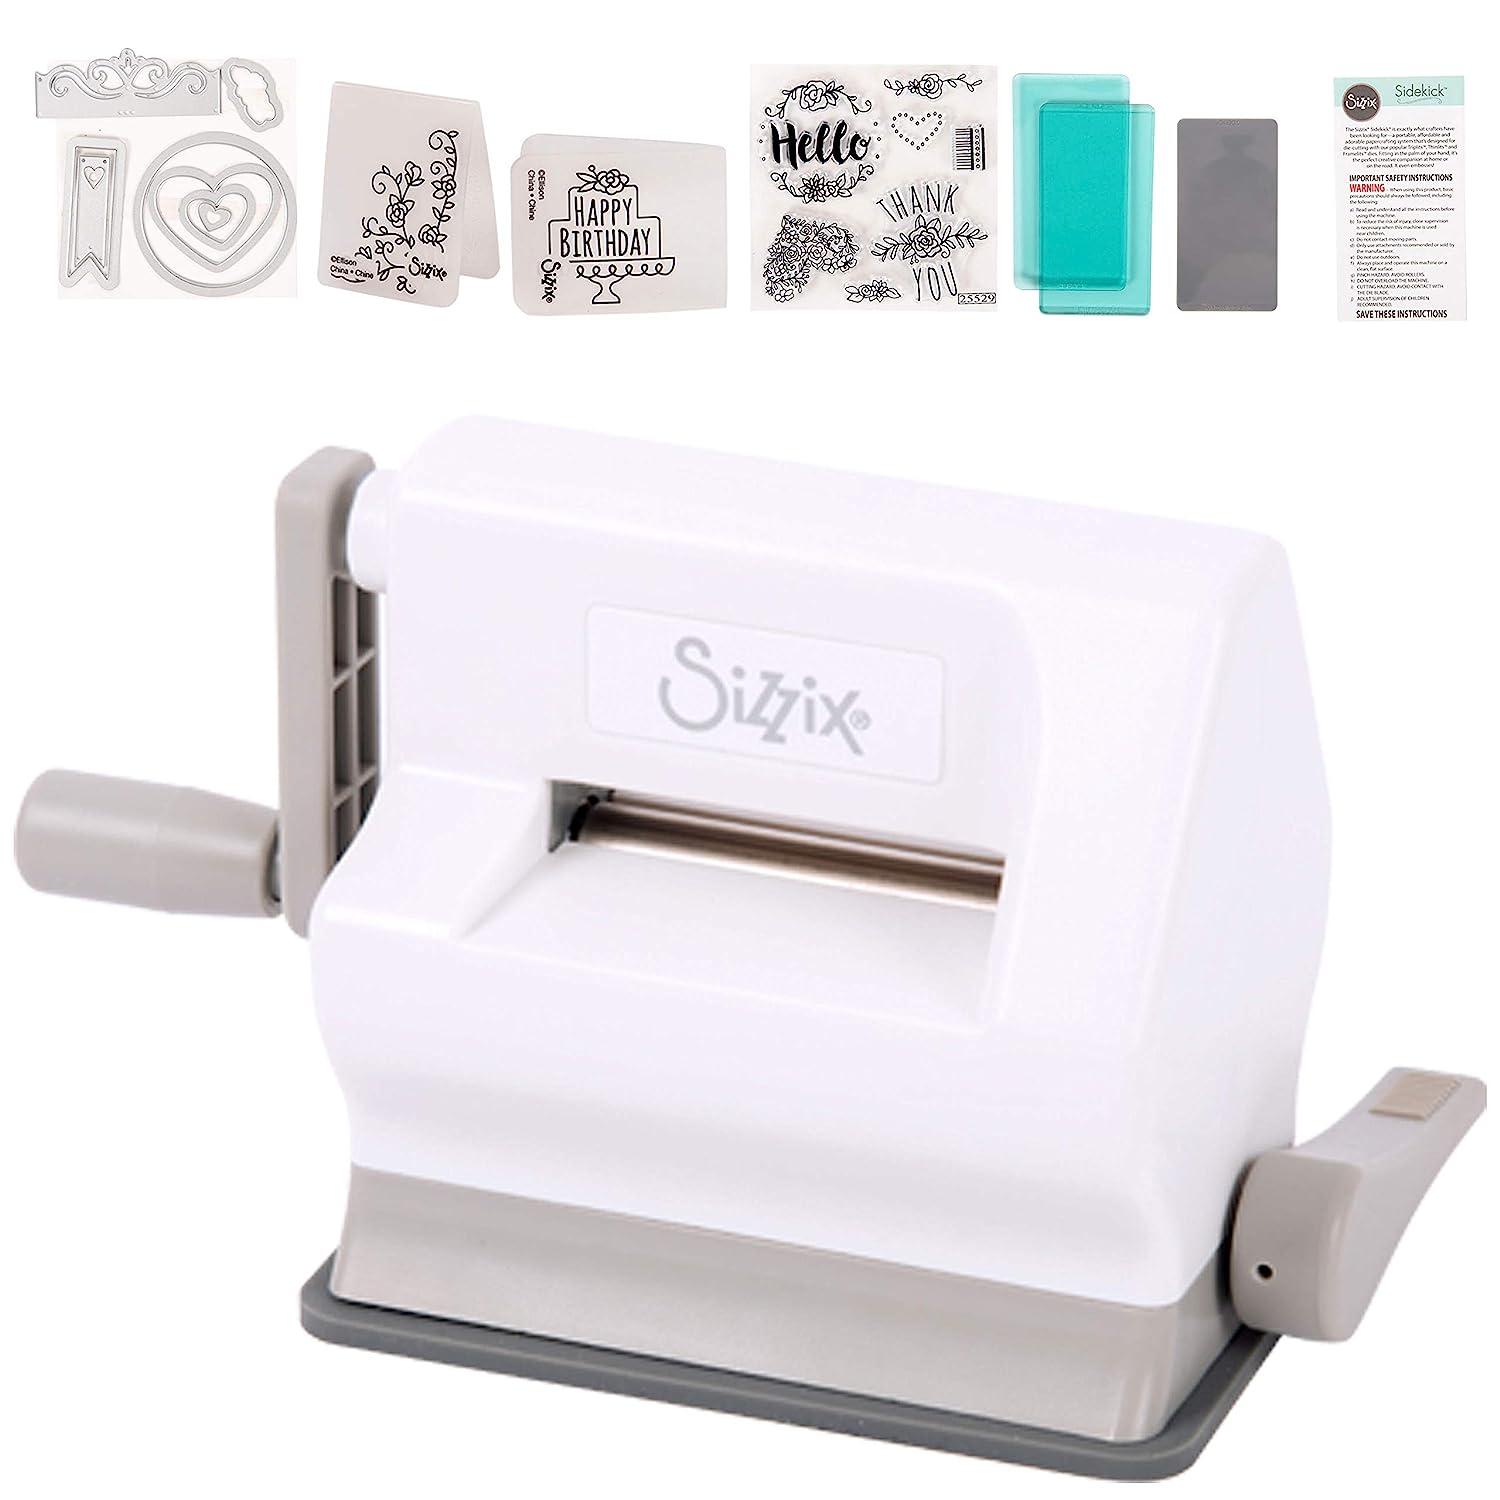 Sizzix Big Shot Plus Manual Die Cutting & Embossing Machine with Cutting  Pads - Create Bigger Scrapbook Pages & Quilting Projects